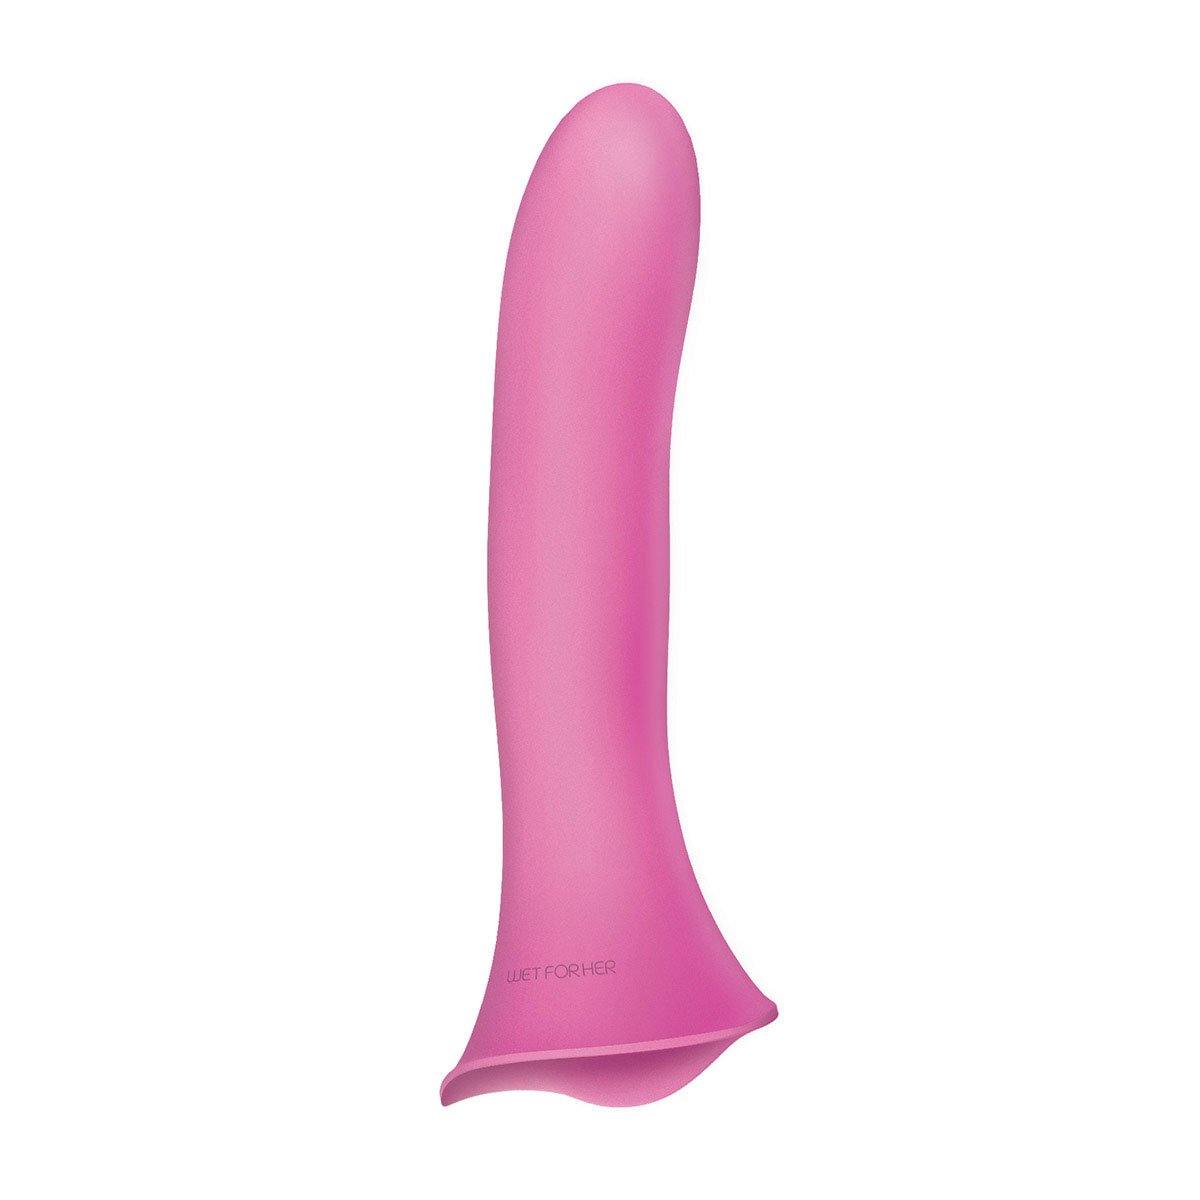 Wet for Her Fusion Dil - Medium - Rose - Buy At Luxury Toy X - Free 3-Day Shipping